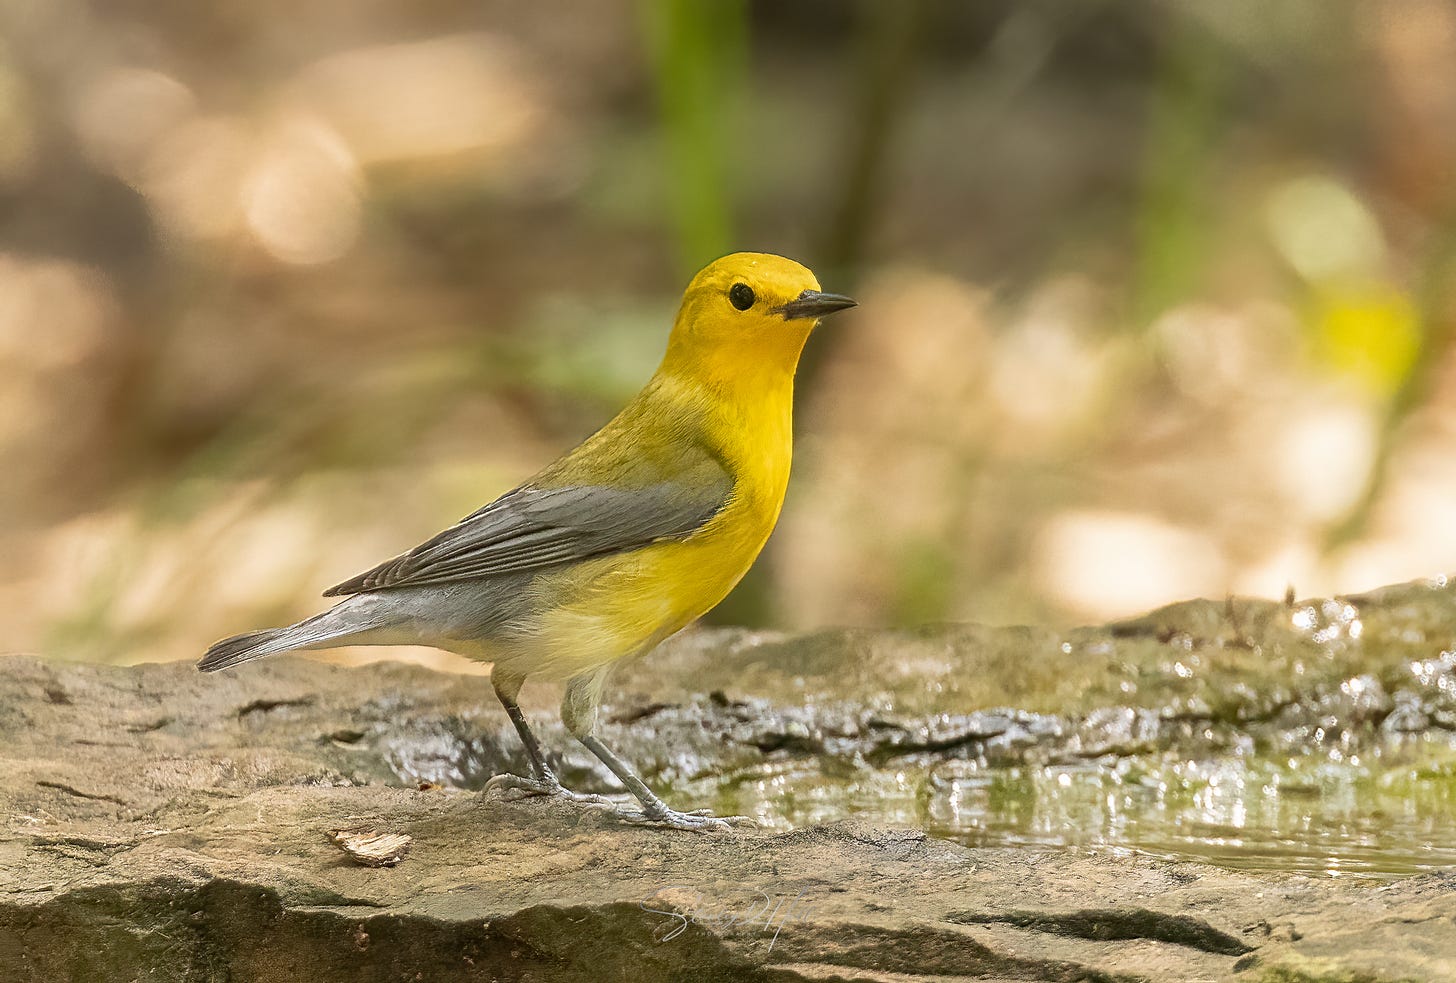 a single yellow and gray Prothonotary warbler standing on a rock with a shallow pool of water looking toward the right of the photo